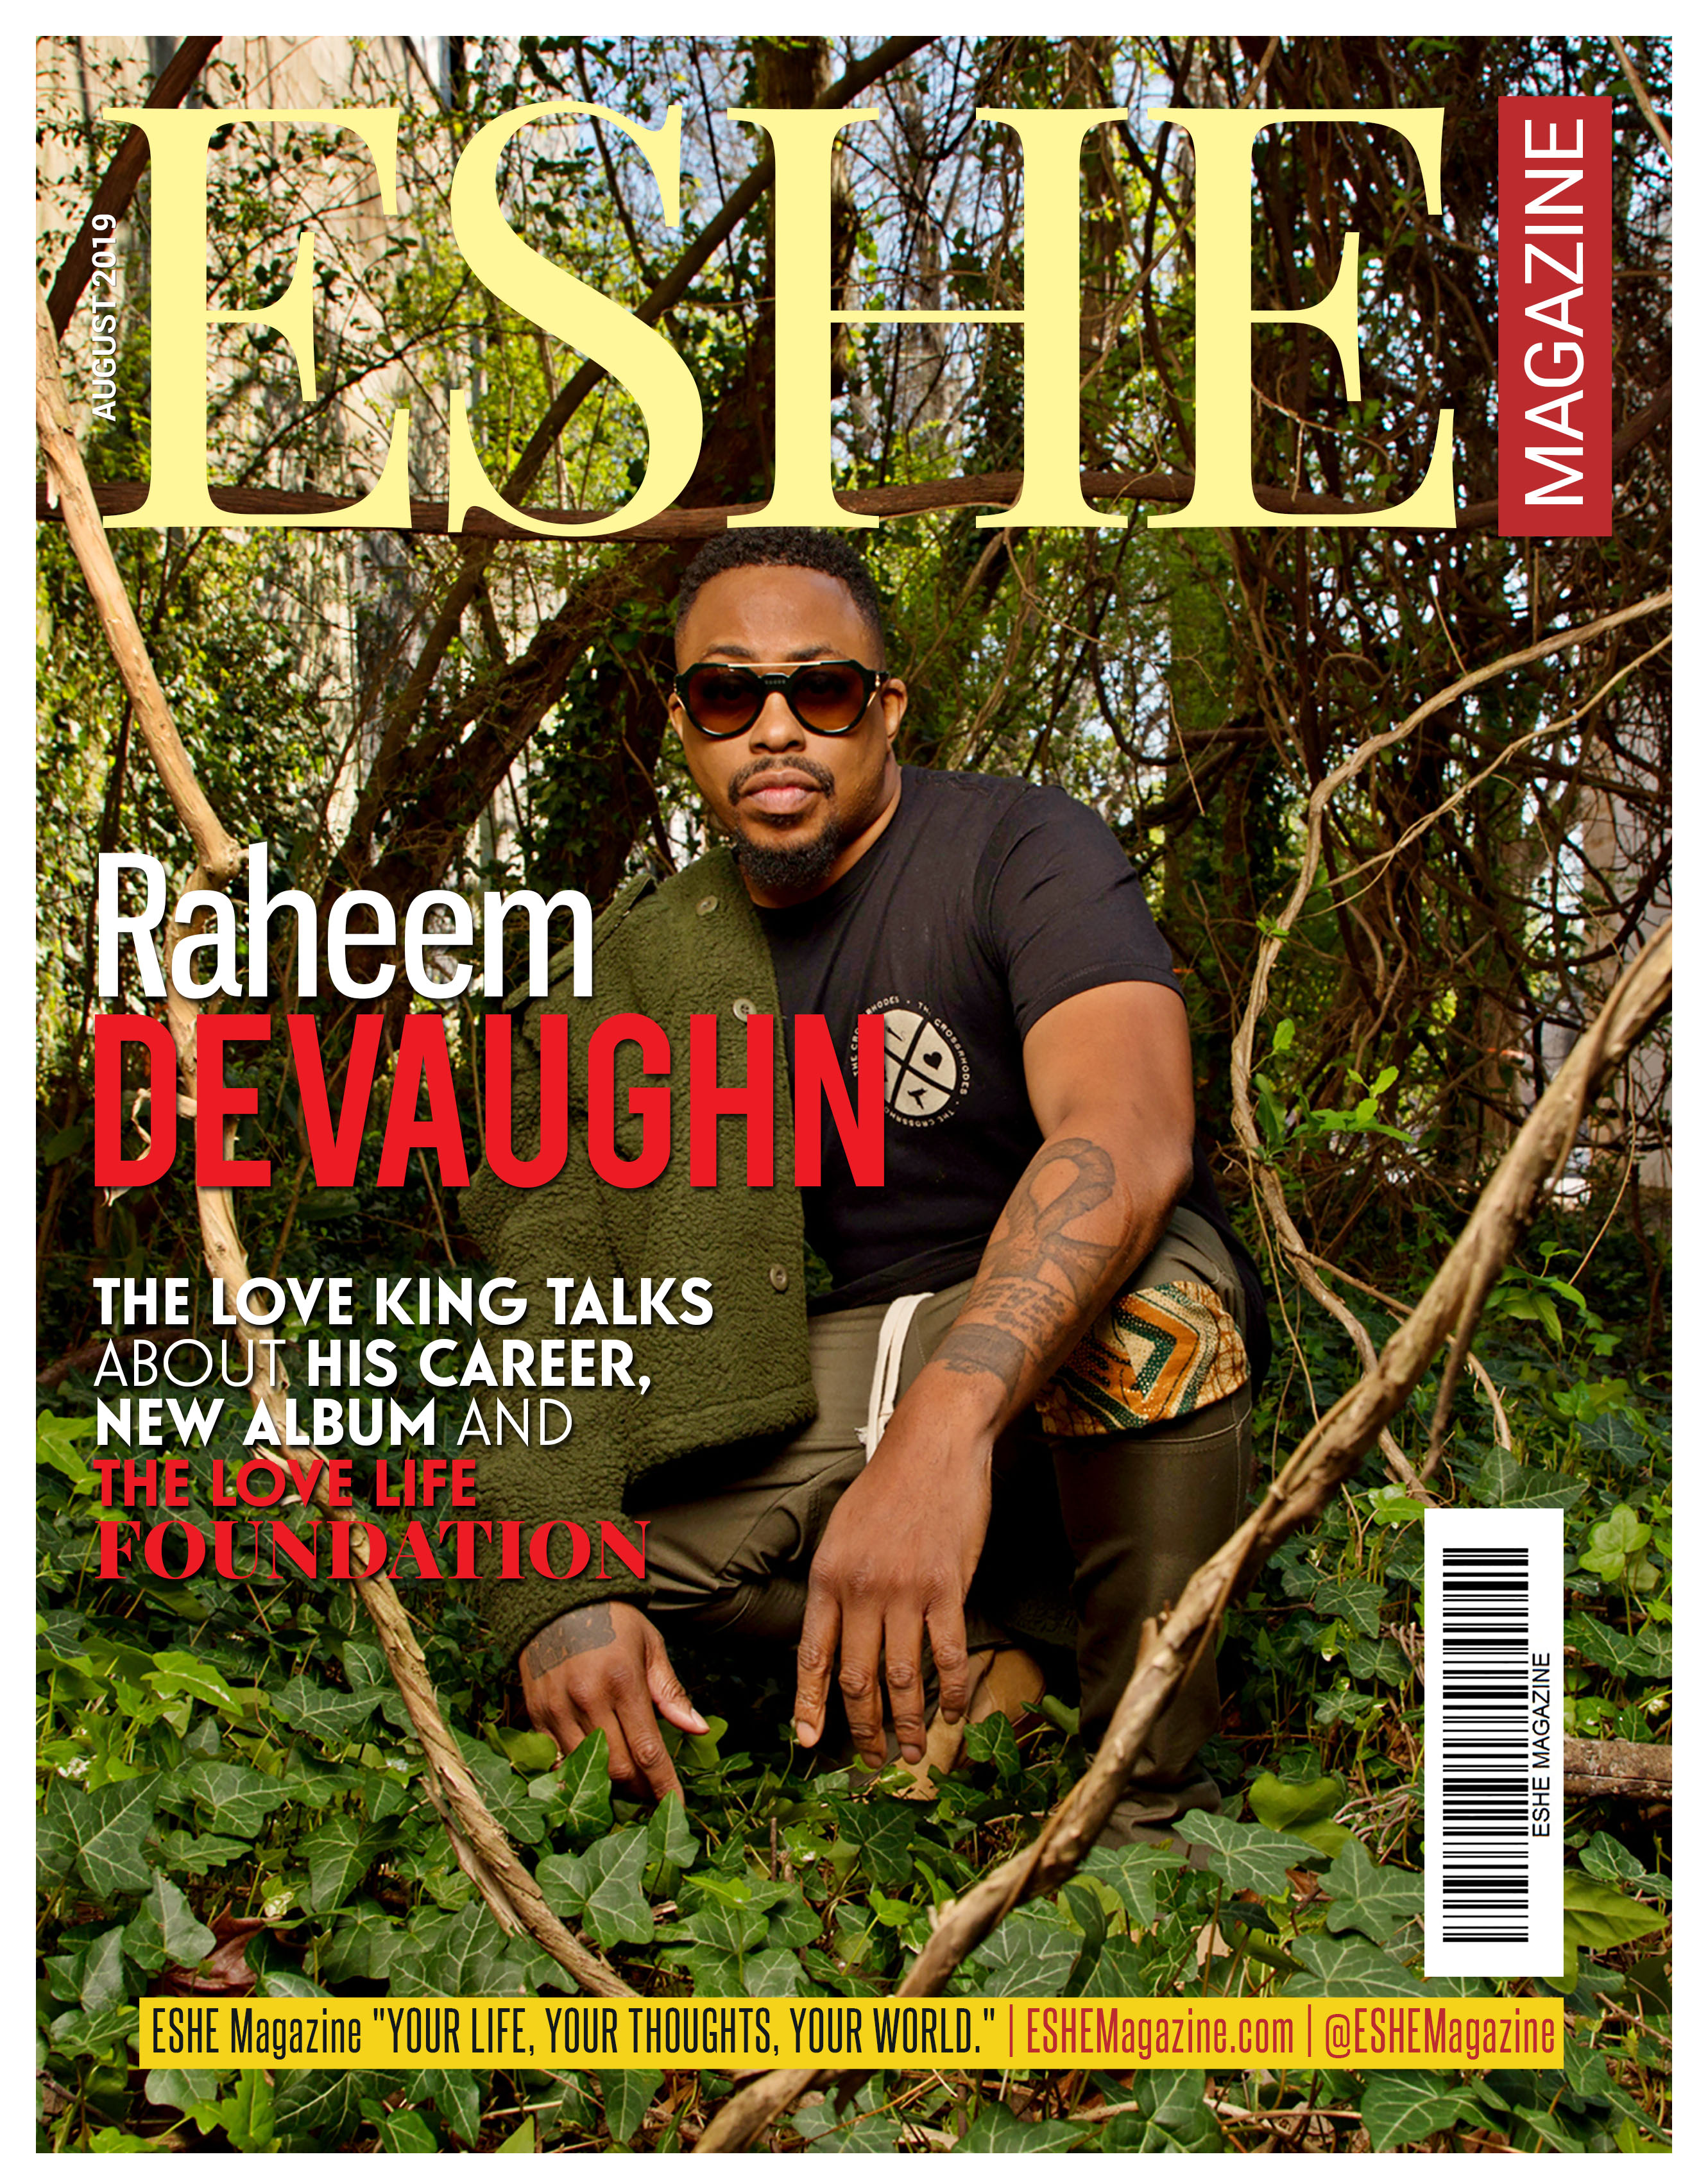 Raheem DeVaughn | Talks About His Career, New Album And The Love Life Foundation